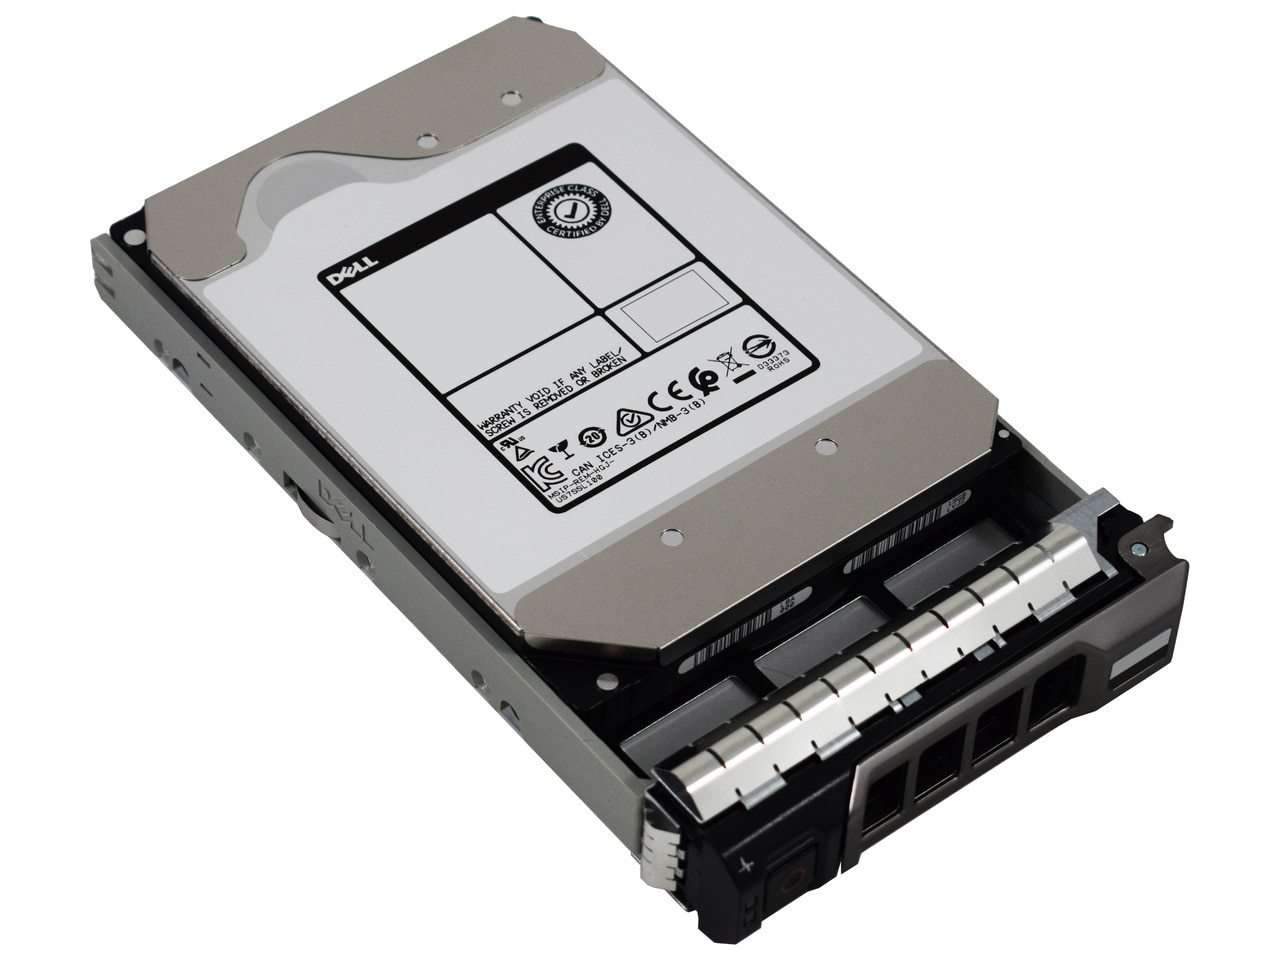 Dell G13 908XX 6TB 7.2K RPM SATA 6Gb/s 3.5" Manufacturer Recertified HDD